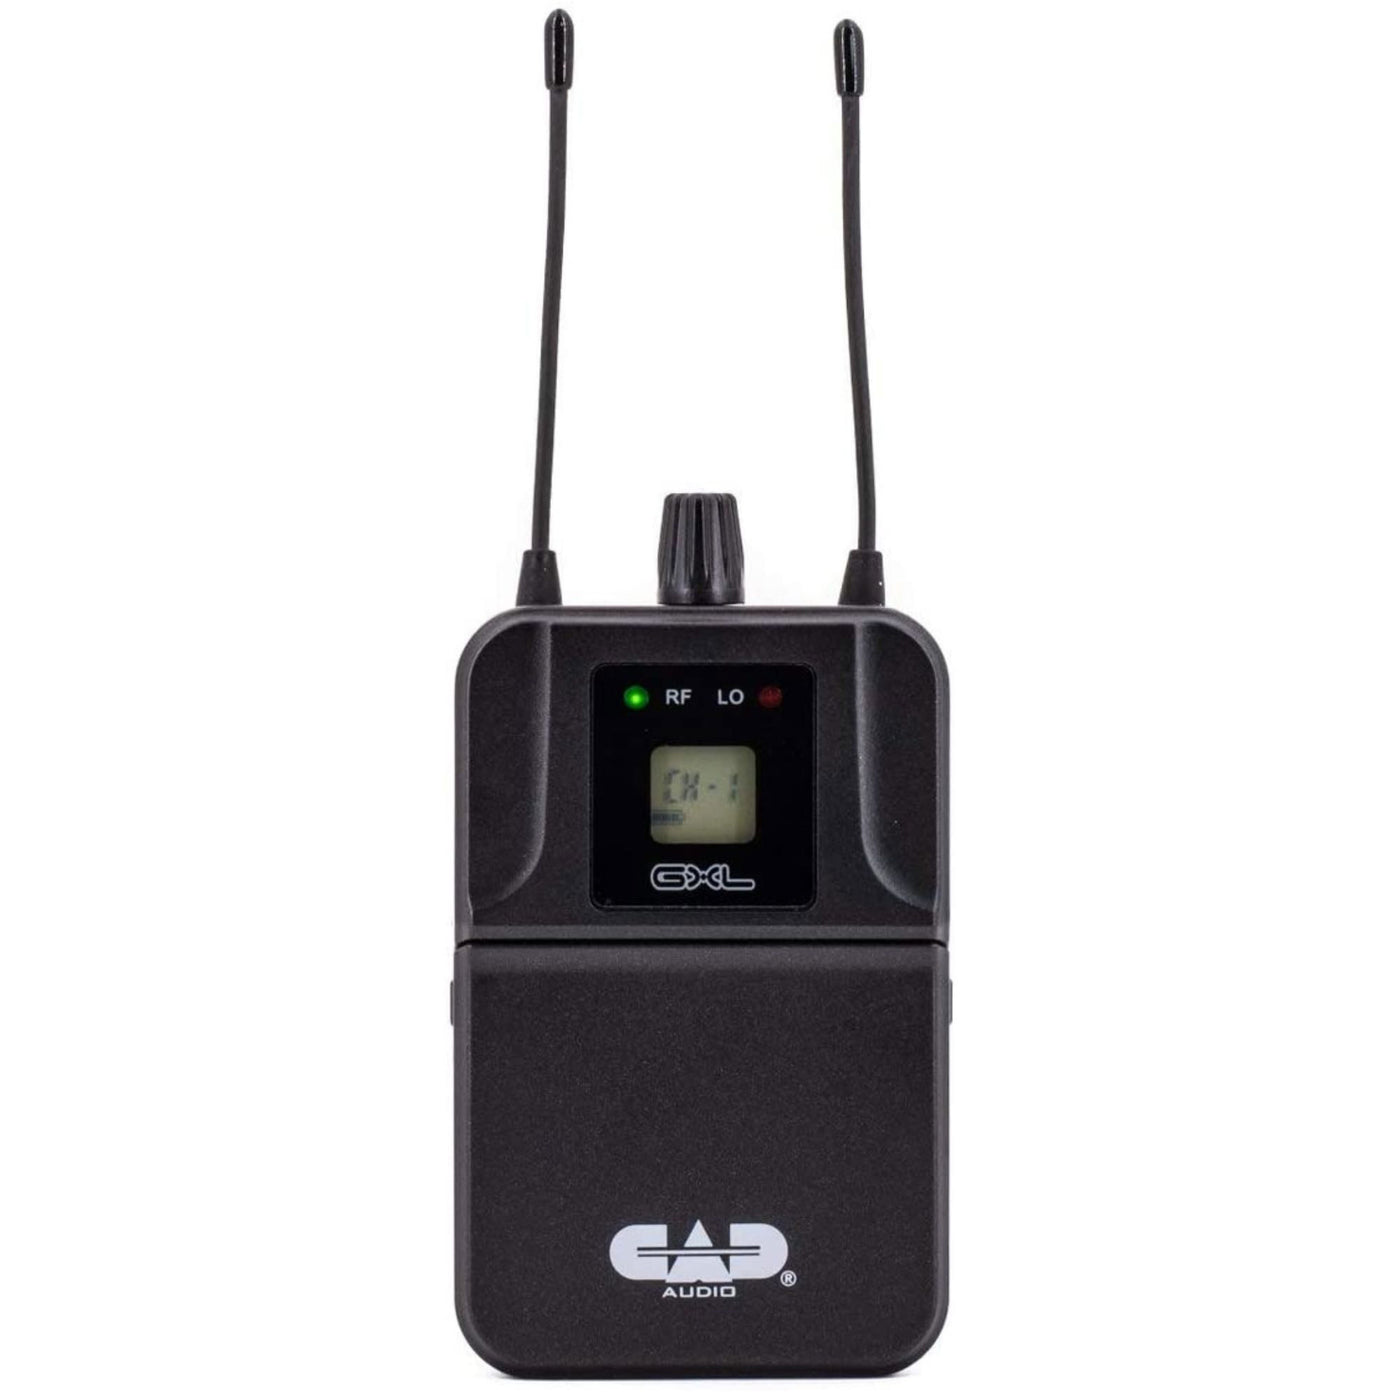 CAD Audio GXLIEM2 Dual-Mix In-Ear Wireless Monitoring System - Includes MEB1 Earbuds, Integral Rack Ears, and Antenna Relocation Kit (GXLIEM2)